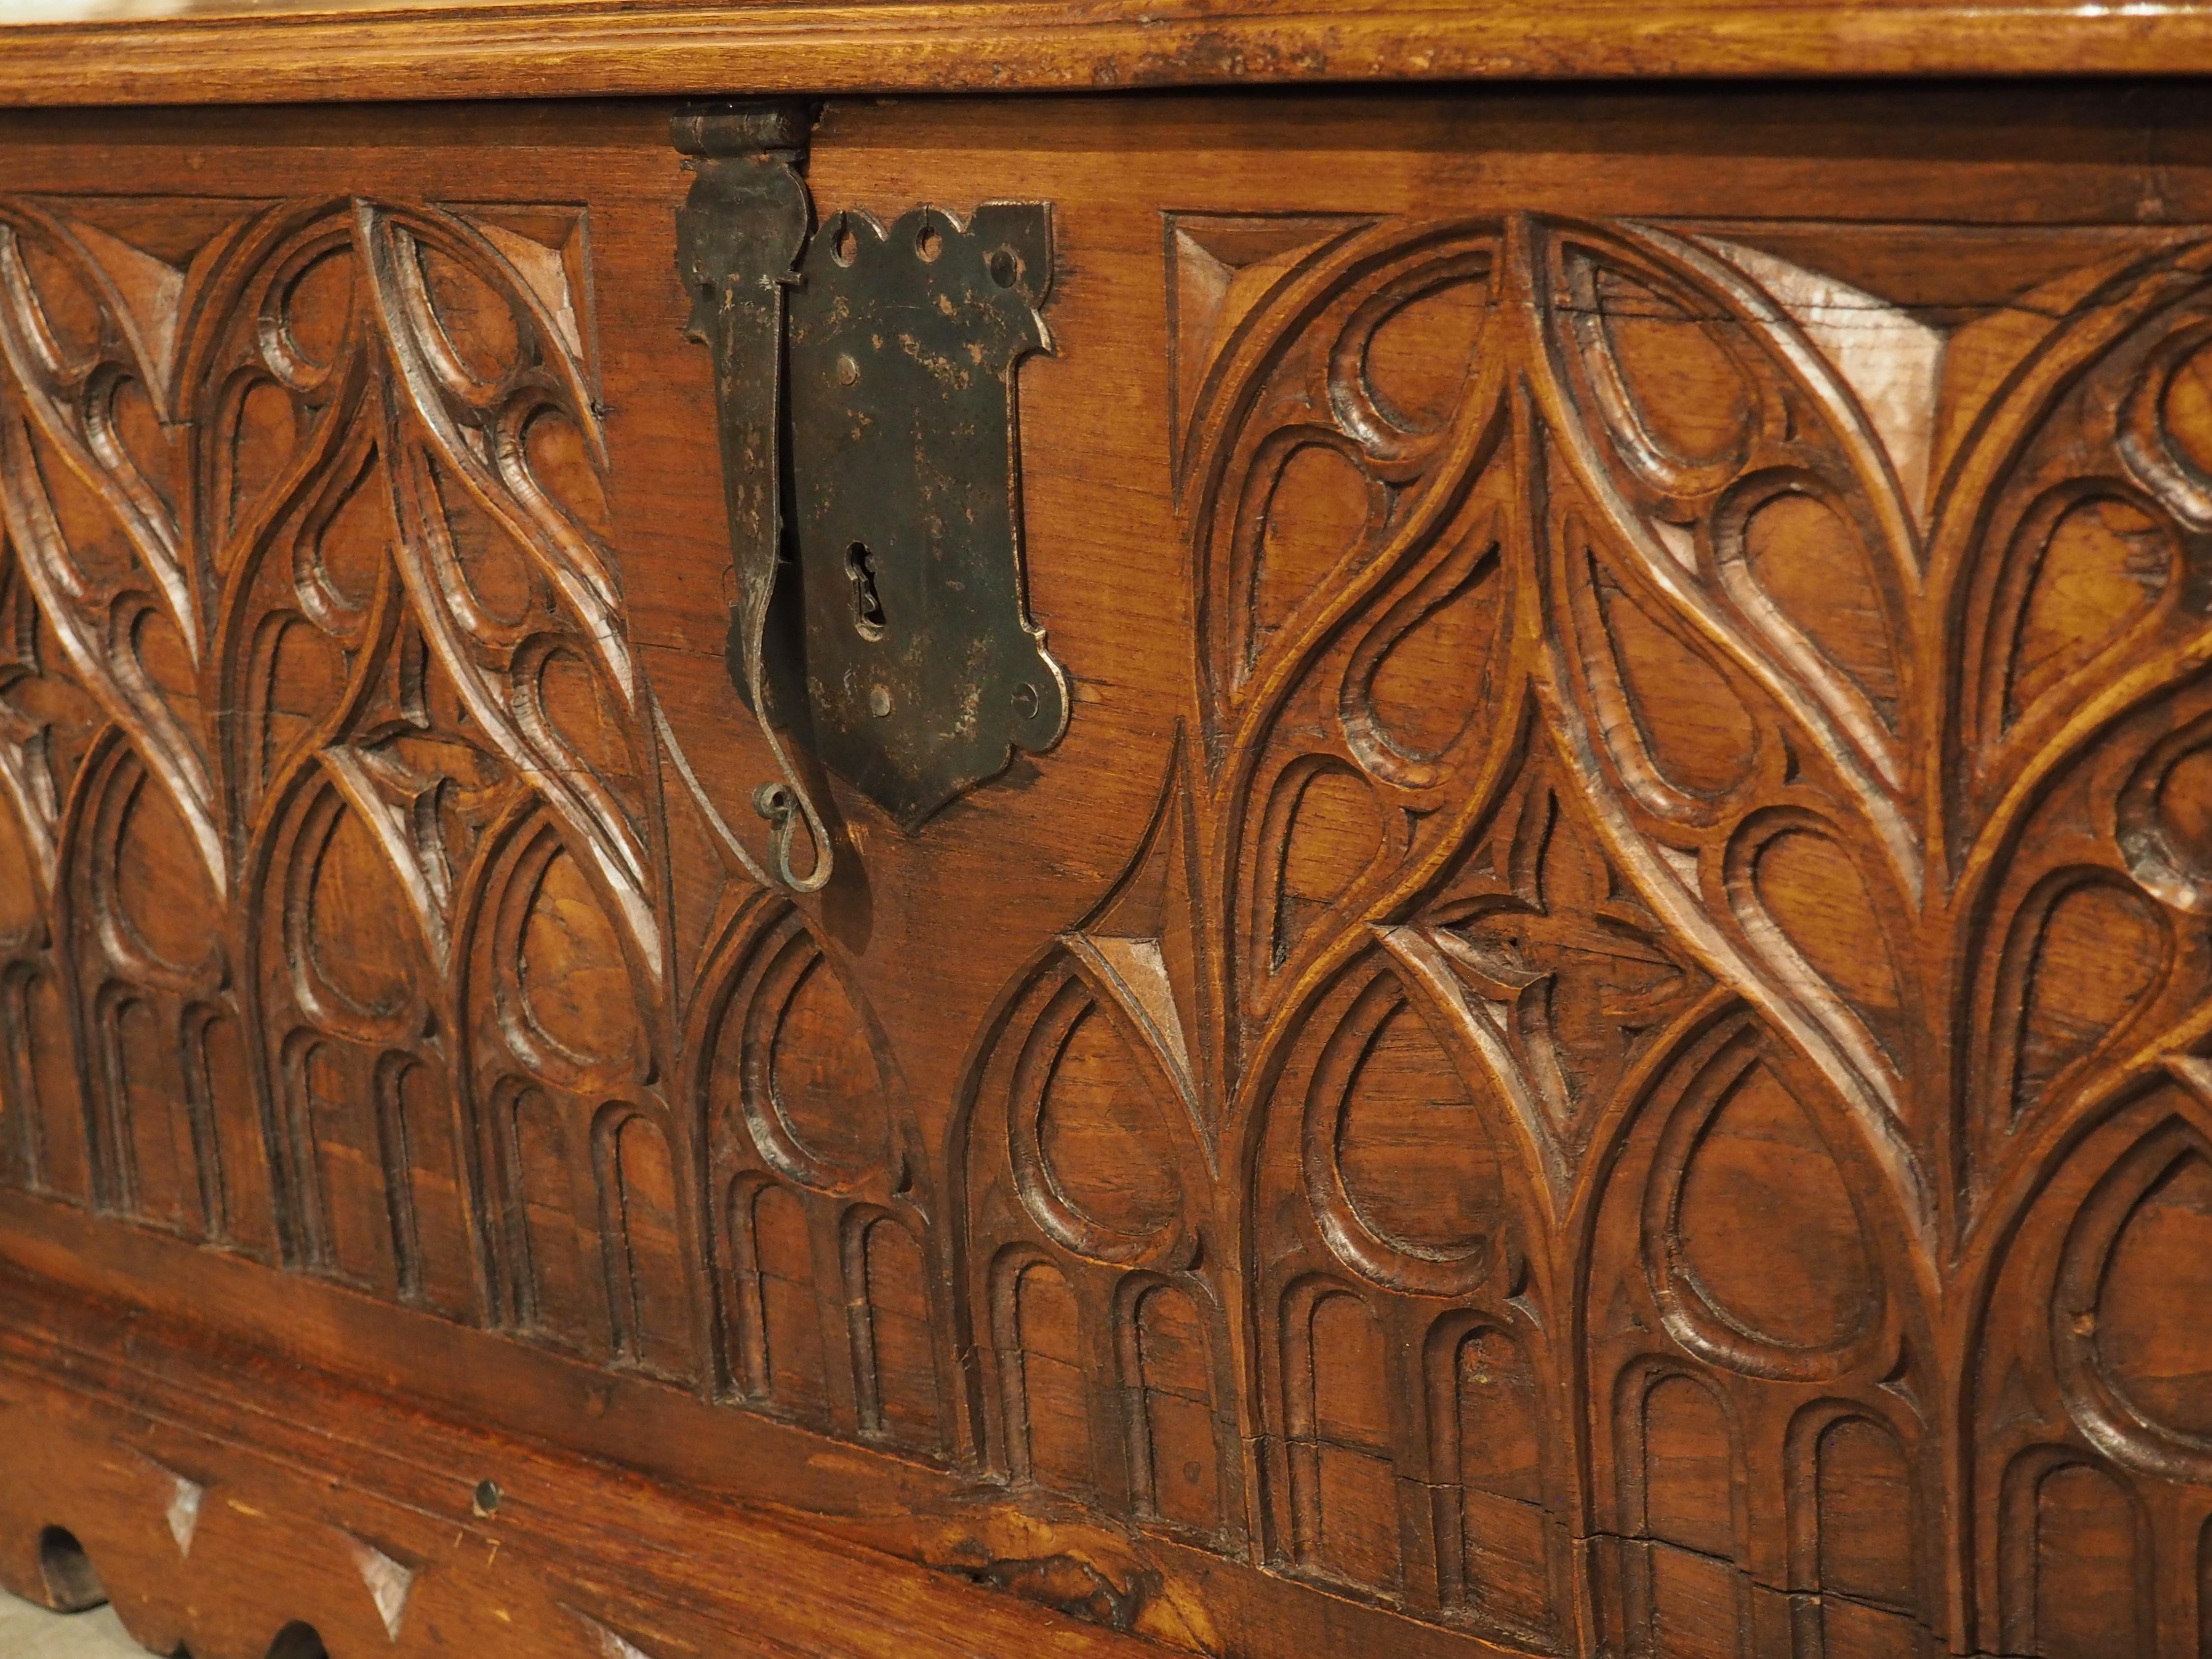 Although the term “Gothic” was originally intended to be used pejoratively, the term has come to describe the intricate latticework and high arches that defined architecture in Europe during the High and Late Middle Ages. Our French blanket chest or